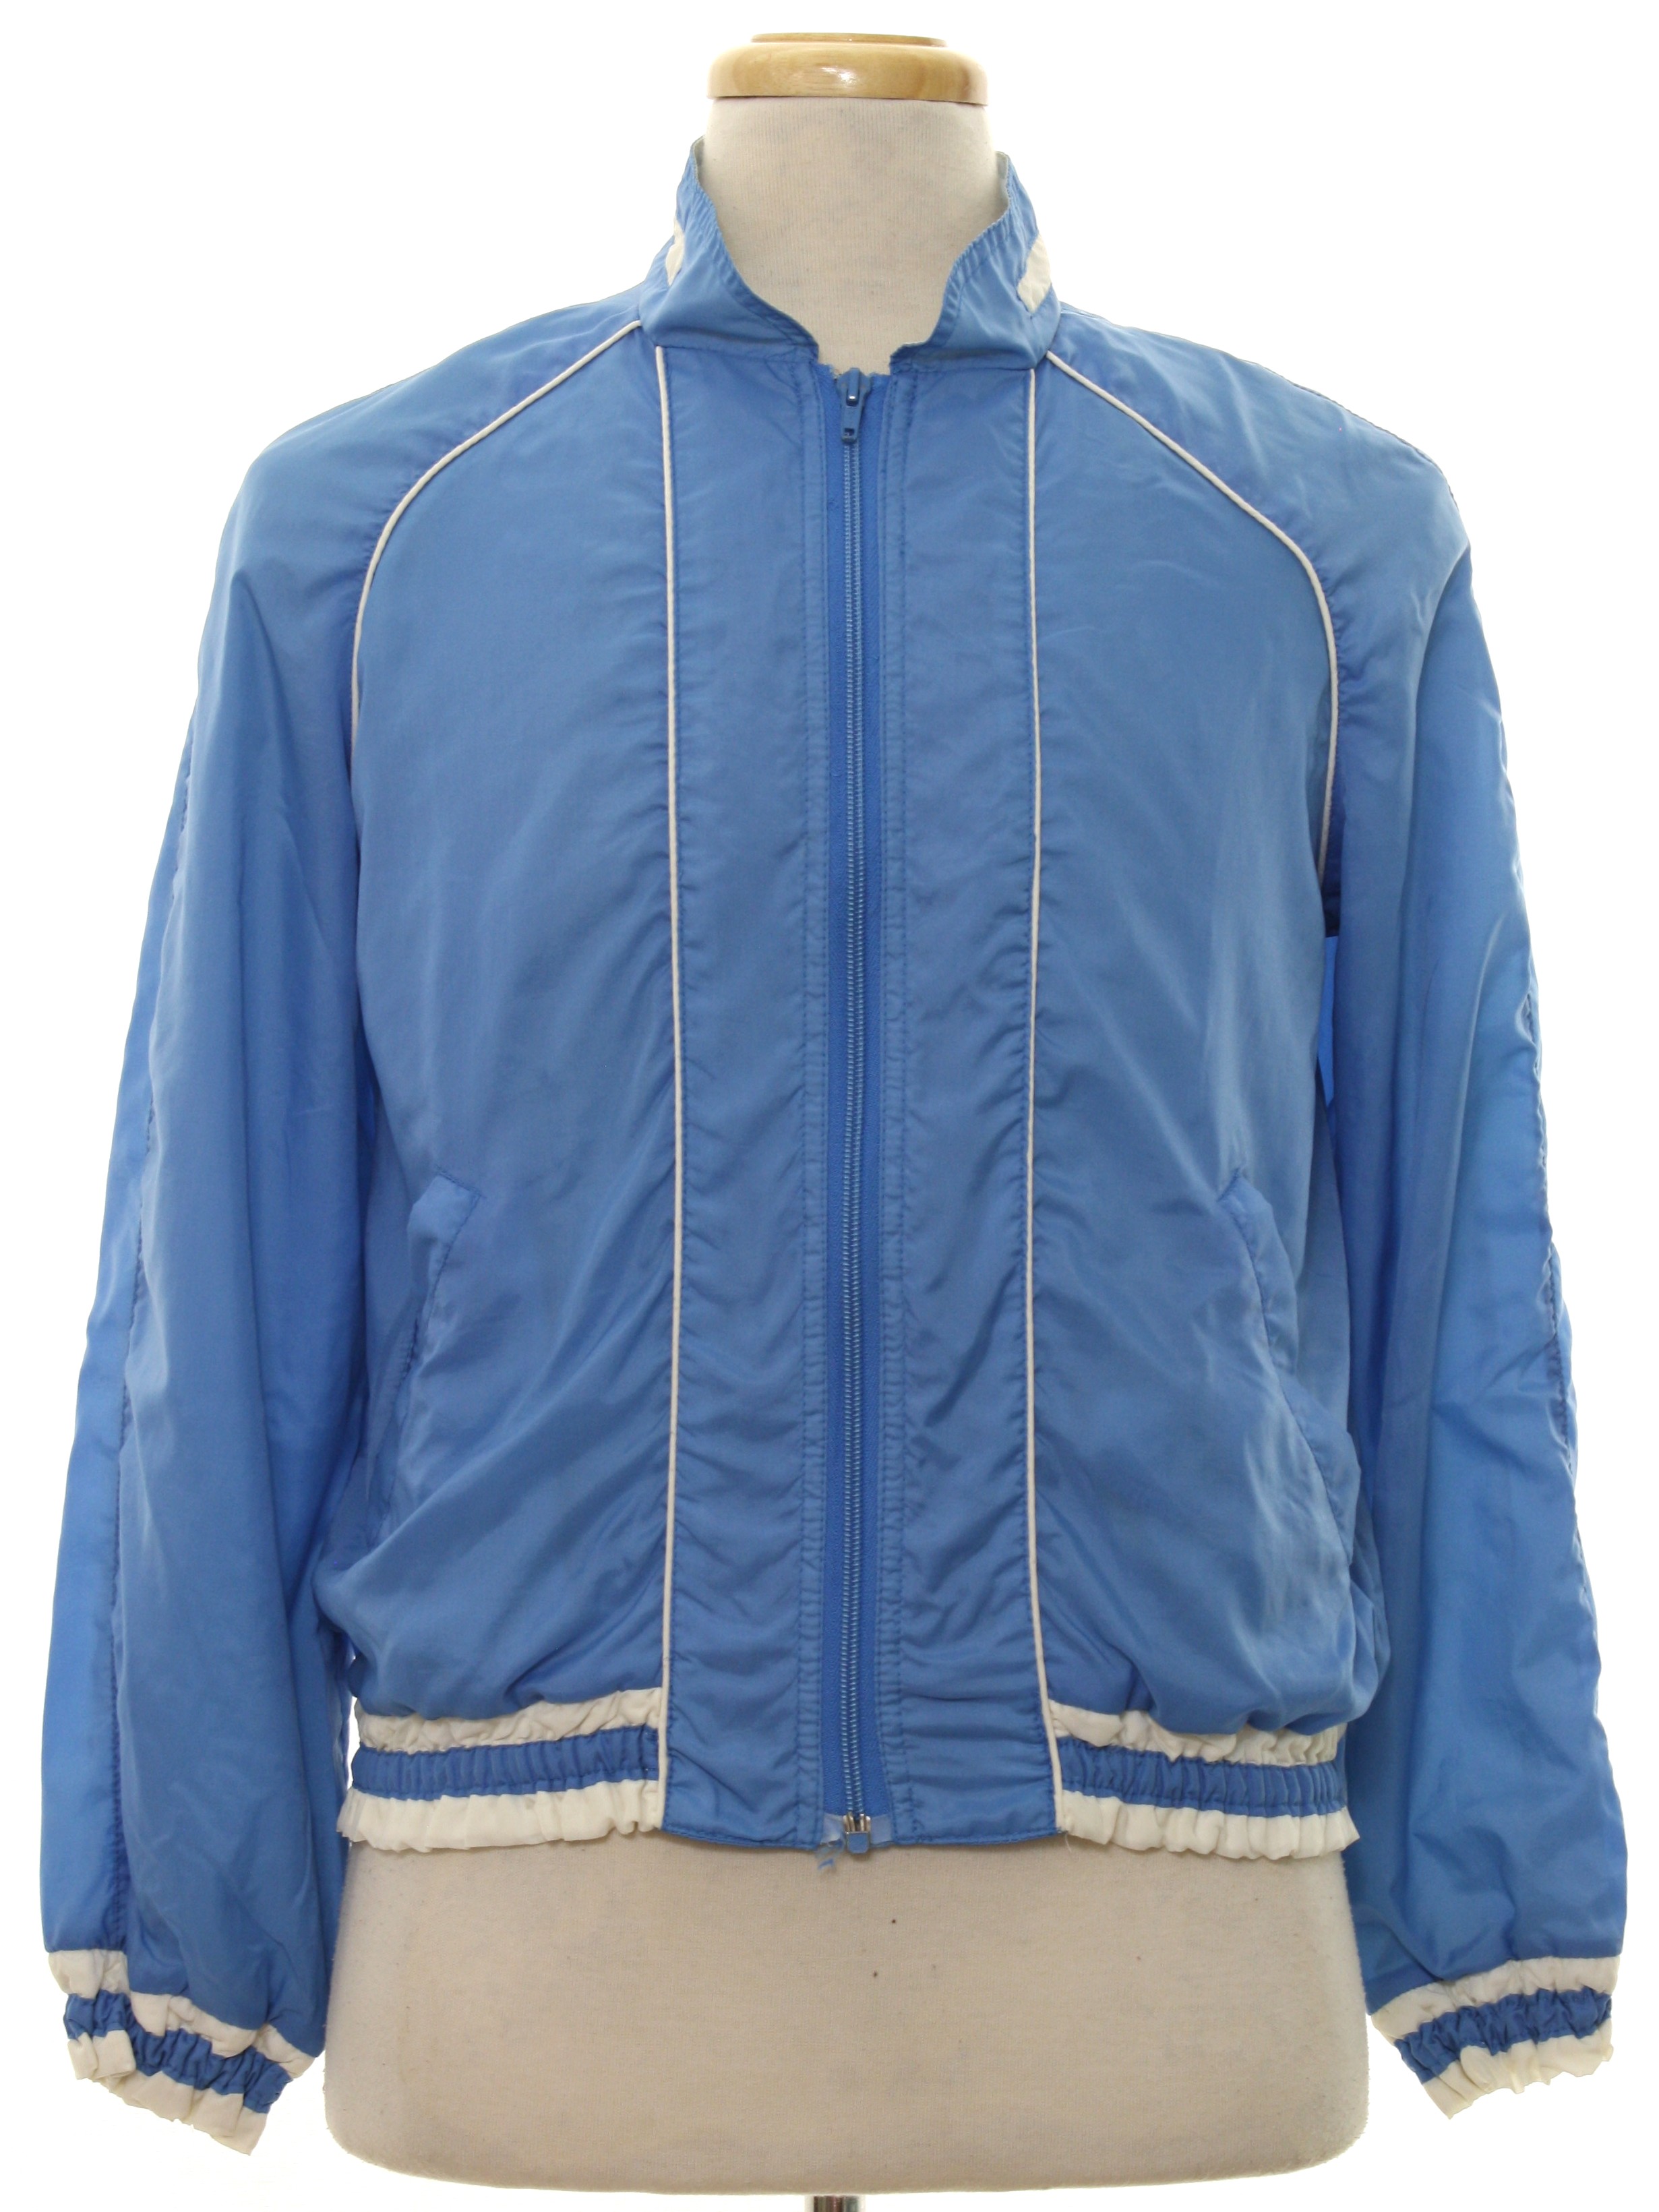 Retro 1980's Jacket (Care Label Only) : 80s -Care Label Only- Mens ...